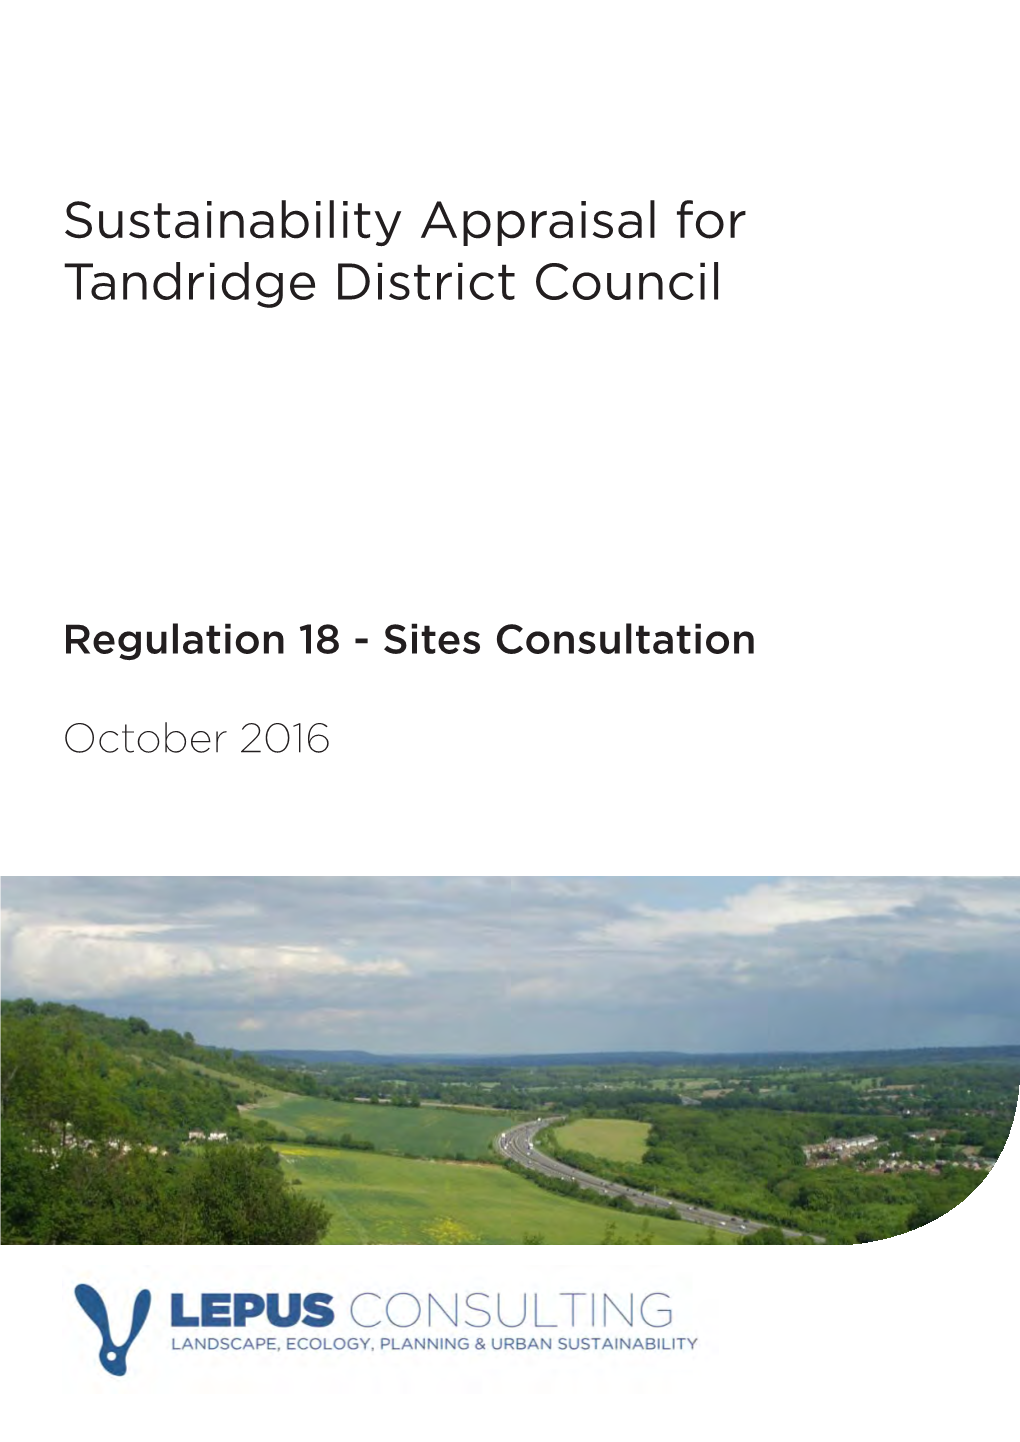 Sustainability Appraisal for Tandridge District Council